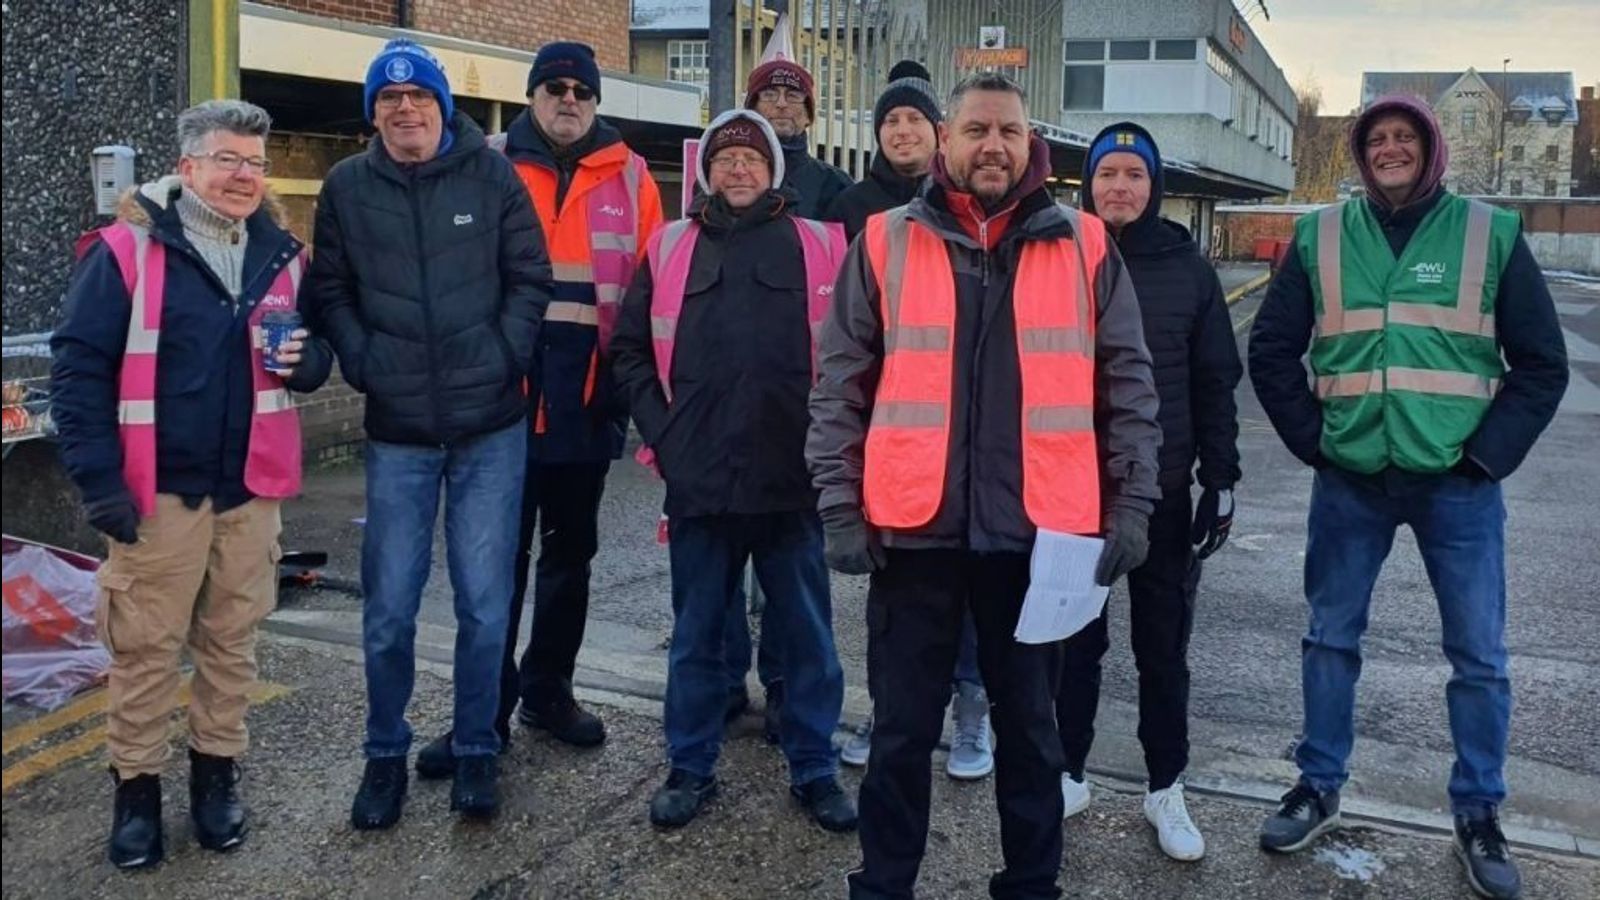 Postal workers speak out against Communication Workers Union’s partnership with Royal Mail over punishing workloads: “The union has well and truly sold its members out”